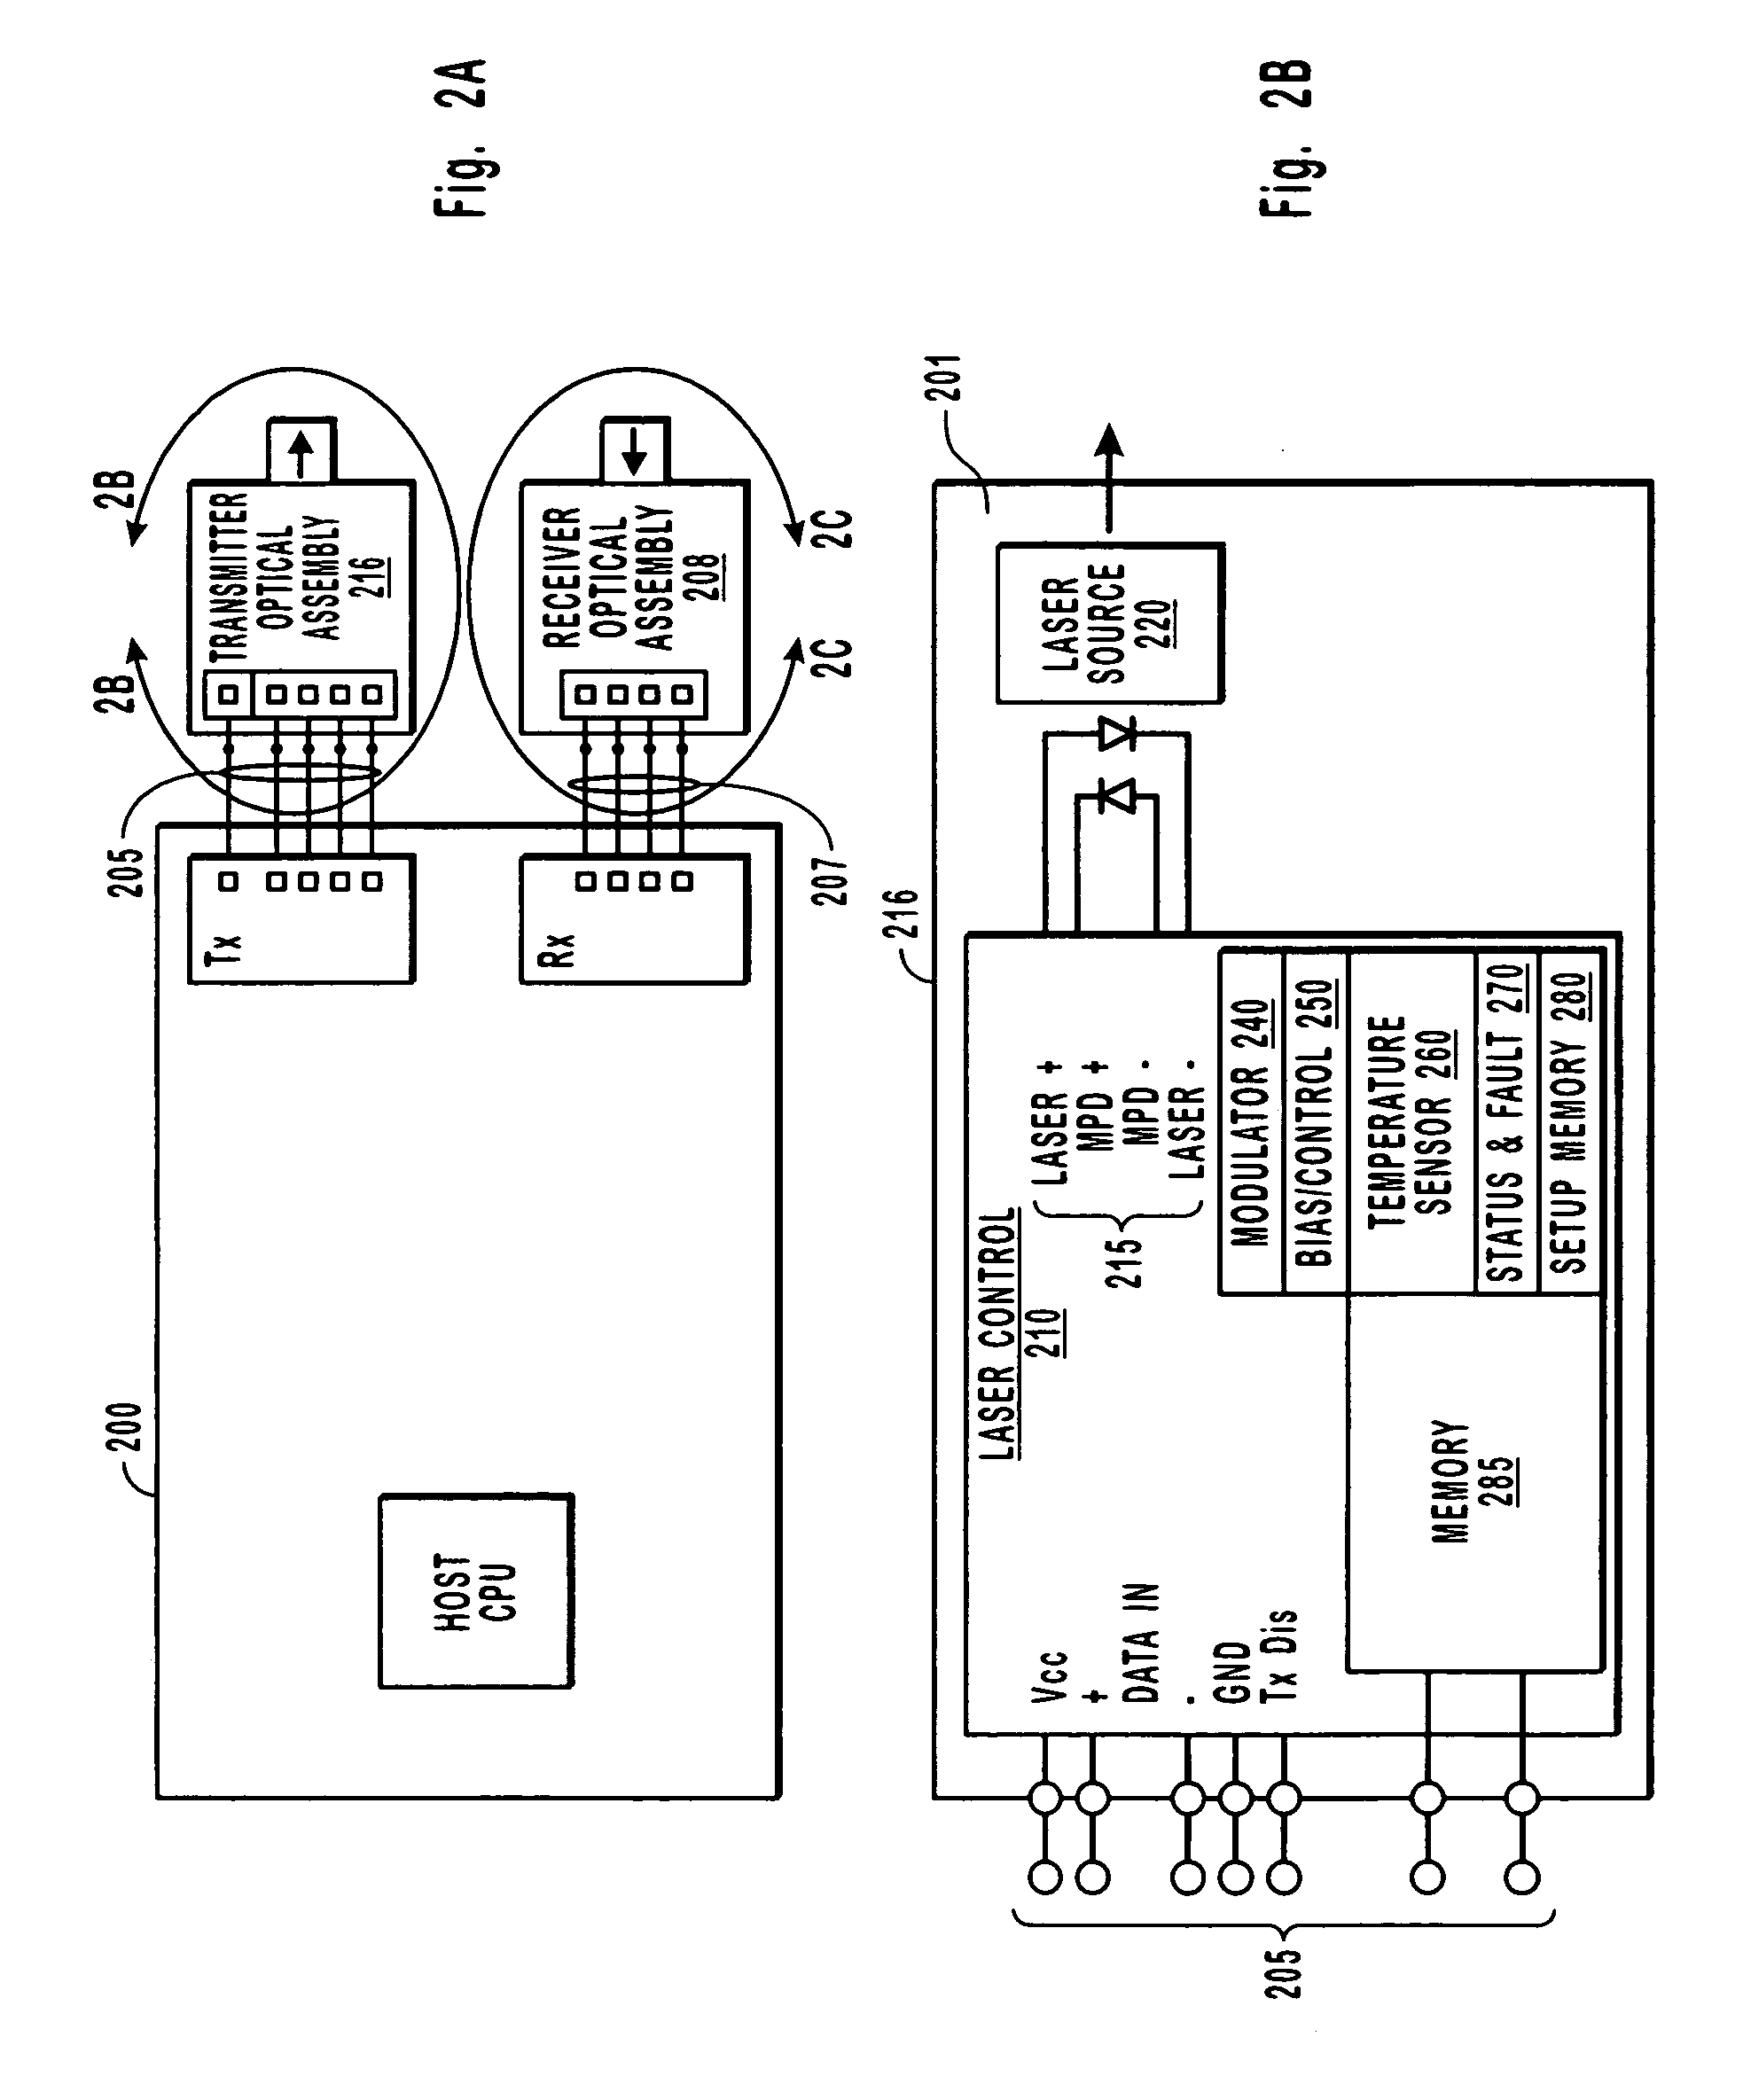 Integrated optical assembly